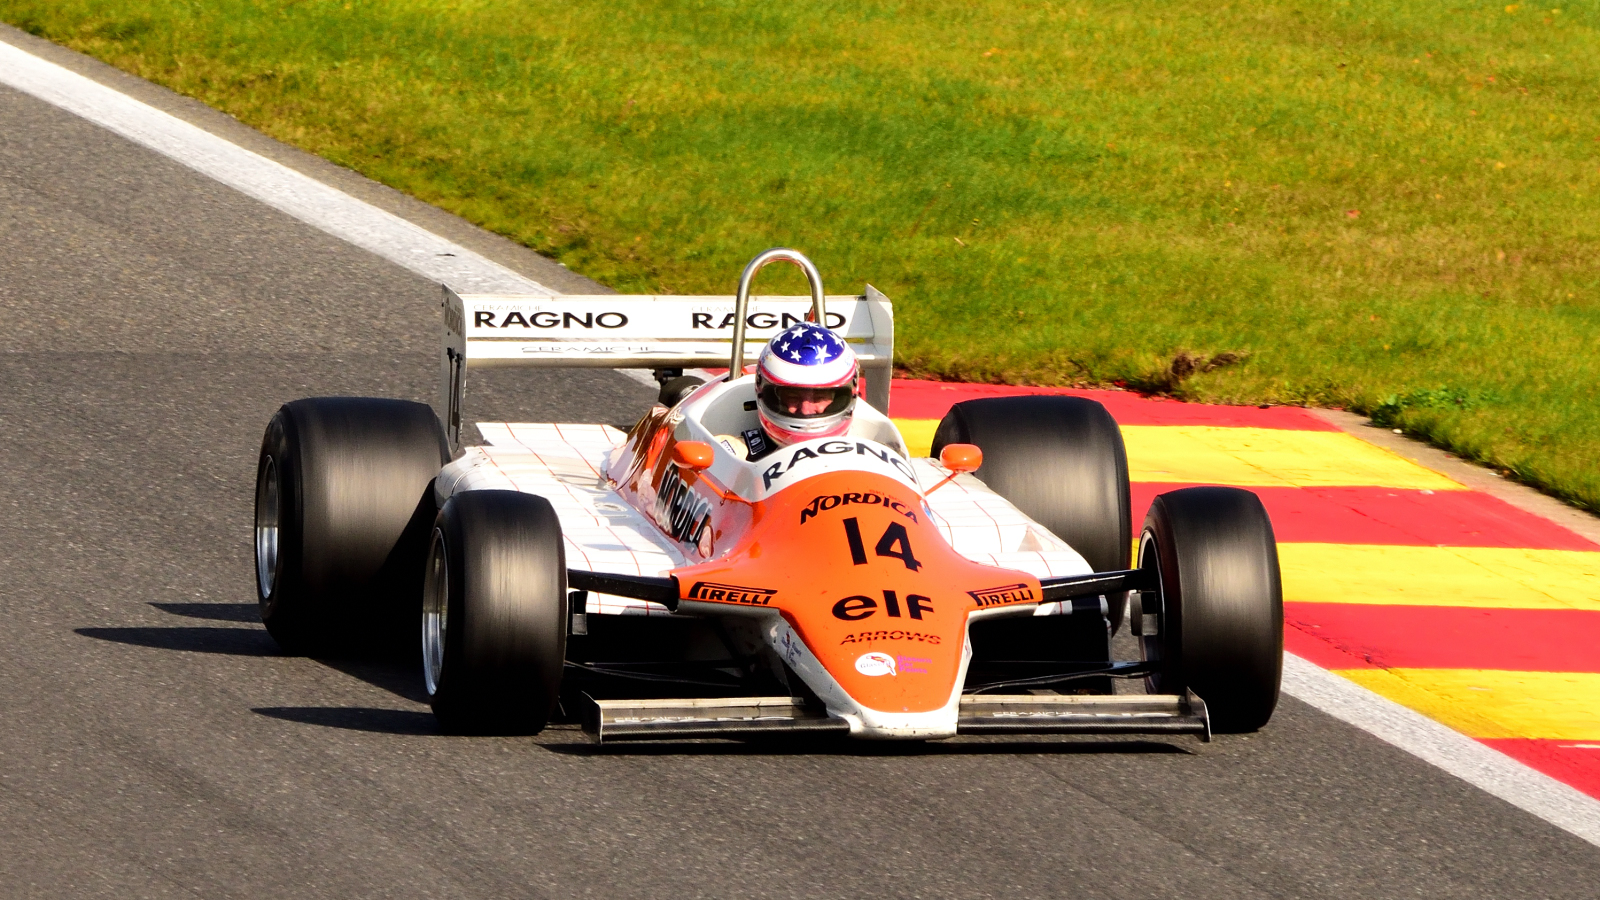 14 ARROWS A4 (1982), Fahrer: D'AUBREBY Patrick (FRA)Hier beim 6h Classic Rennen am 30.09.2023 Rahmenprogramm MASTERS RACING LEGENDS ~ F1 CARS 1966-1985in Spa Francorchamps 